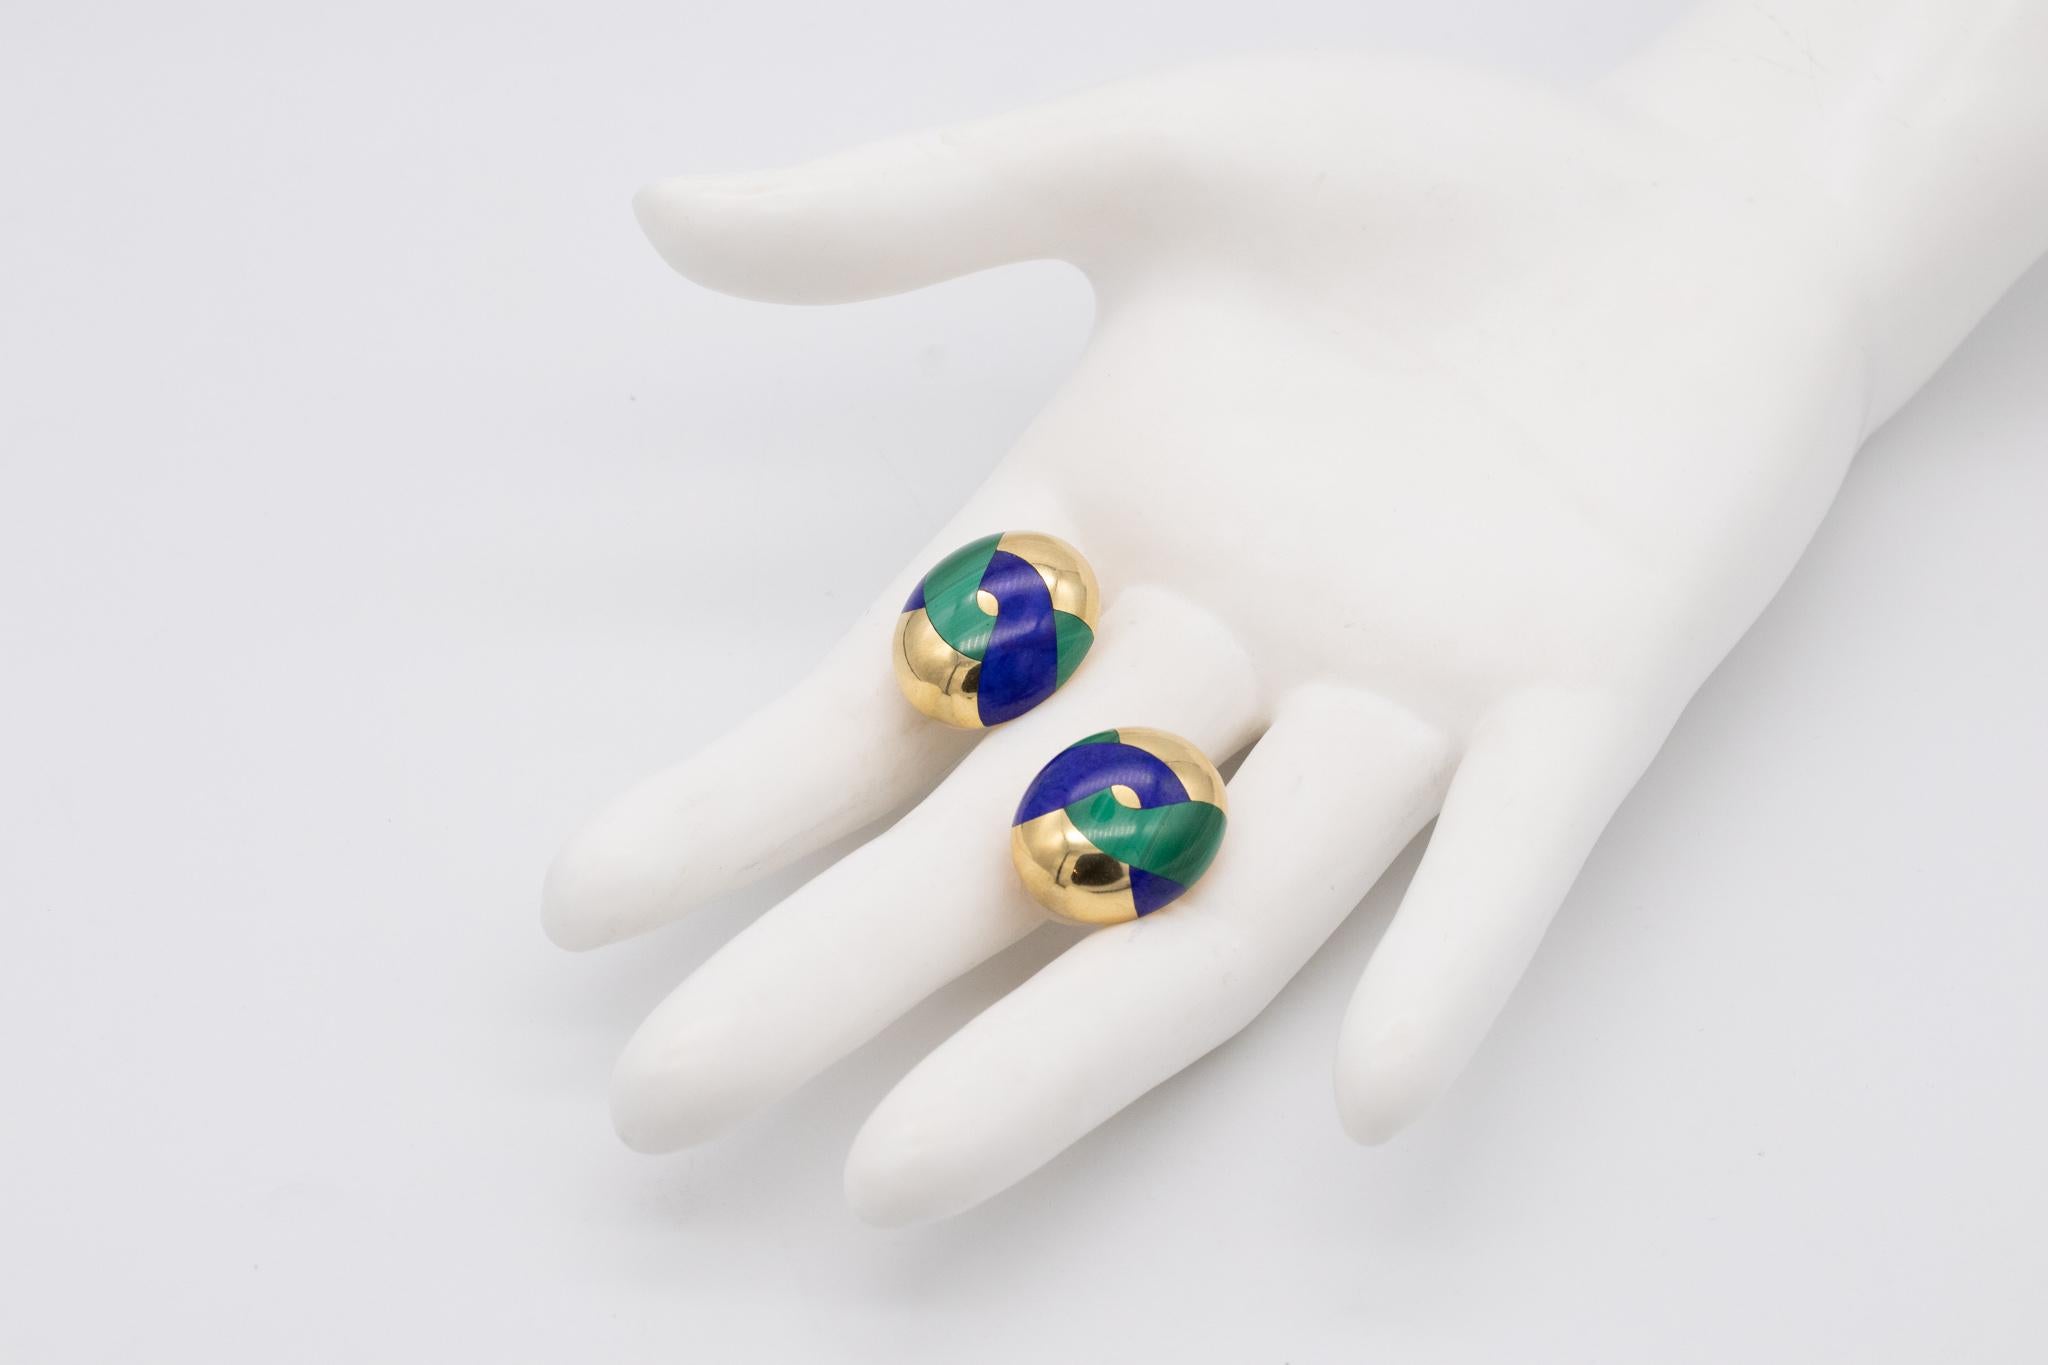 Rare earrings designed by Angela Cummings for Tiffany & Co.

A vintage pair of earrings designed by Cummings, back in the early 1970's. They are oval shaped, very colorful and youthful pieces, crafted in solid 18 kt of polished yellow gold. Suited,